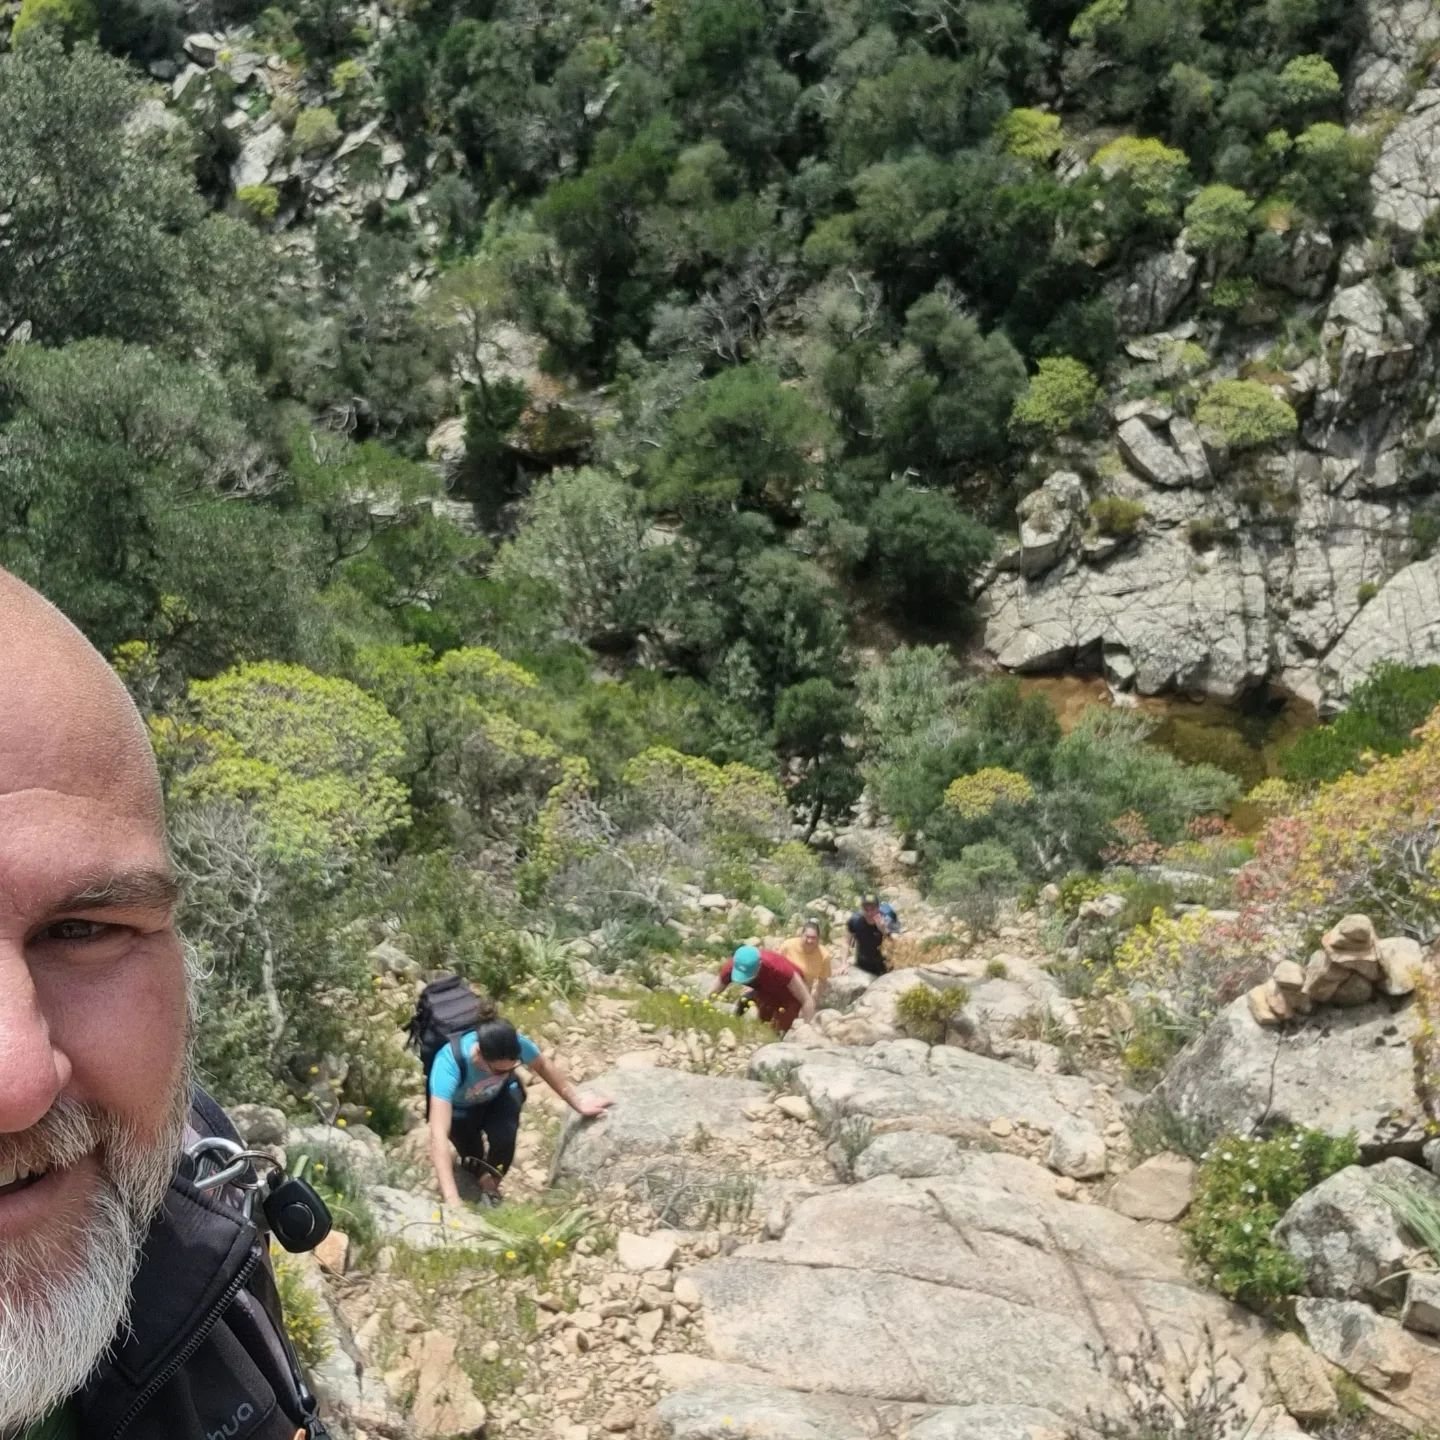 It's been a fabulous week end here in #Sardinia 
#spring is here and we enjoyed it. 

#sardiniaadventures #adventures #hikingadventures #hiking #ebike #ebiking #sulcis #camminominerariosantabarbara #sulcis #waterfalls  #villacidro